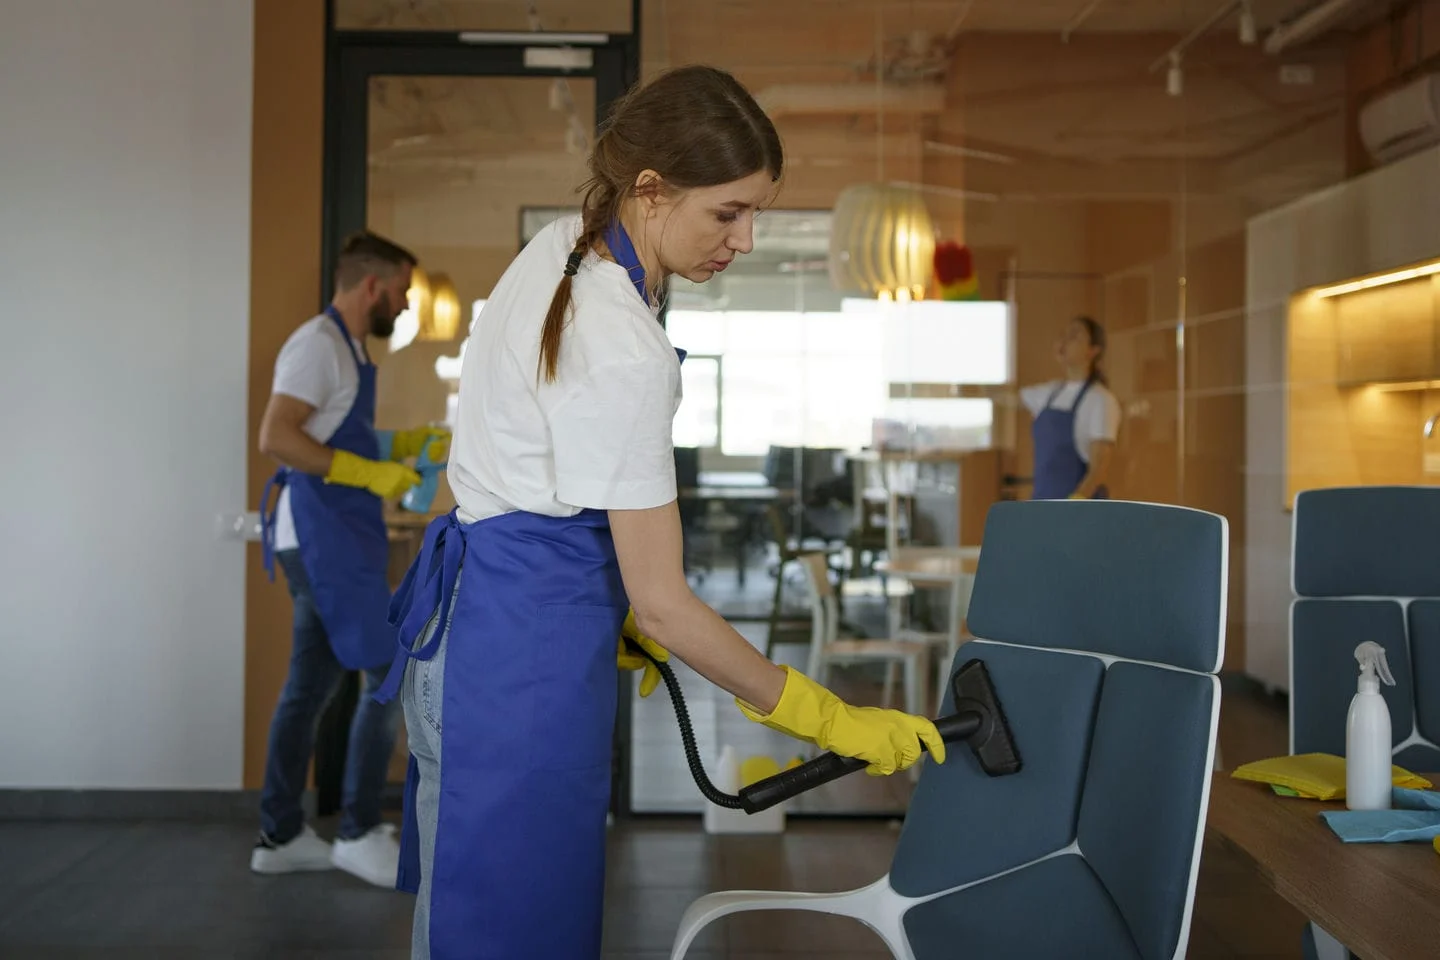 Comparing Office Cleaning Services in the Milwaukee Area